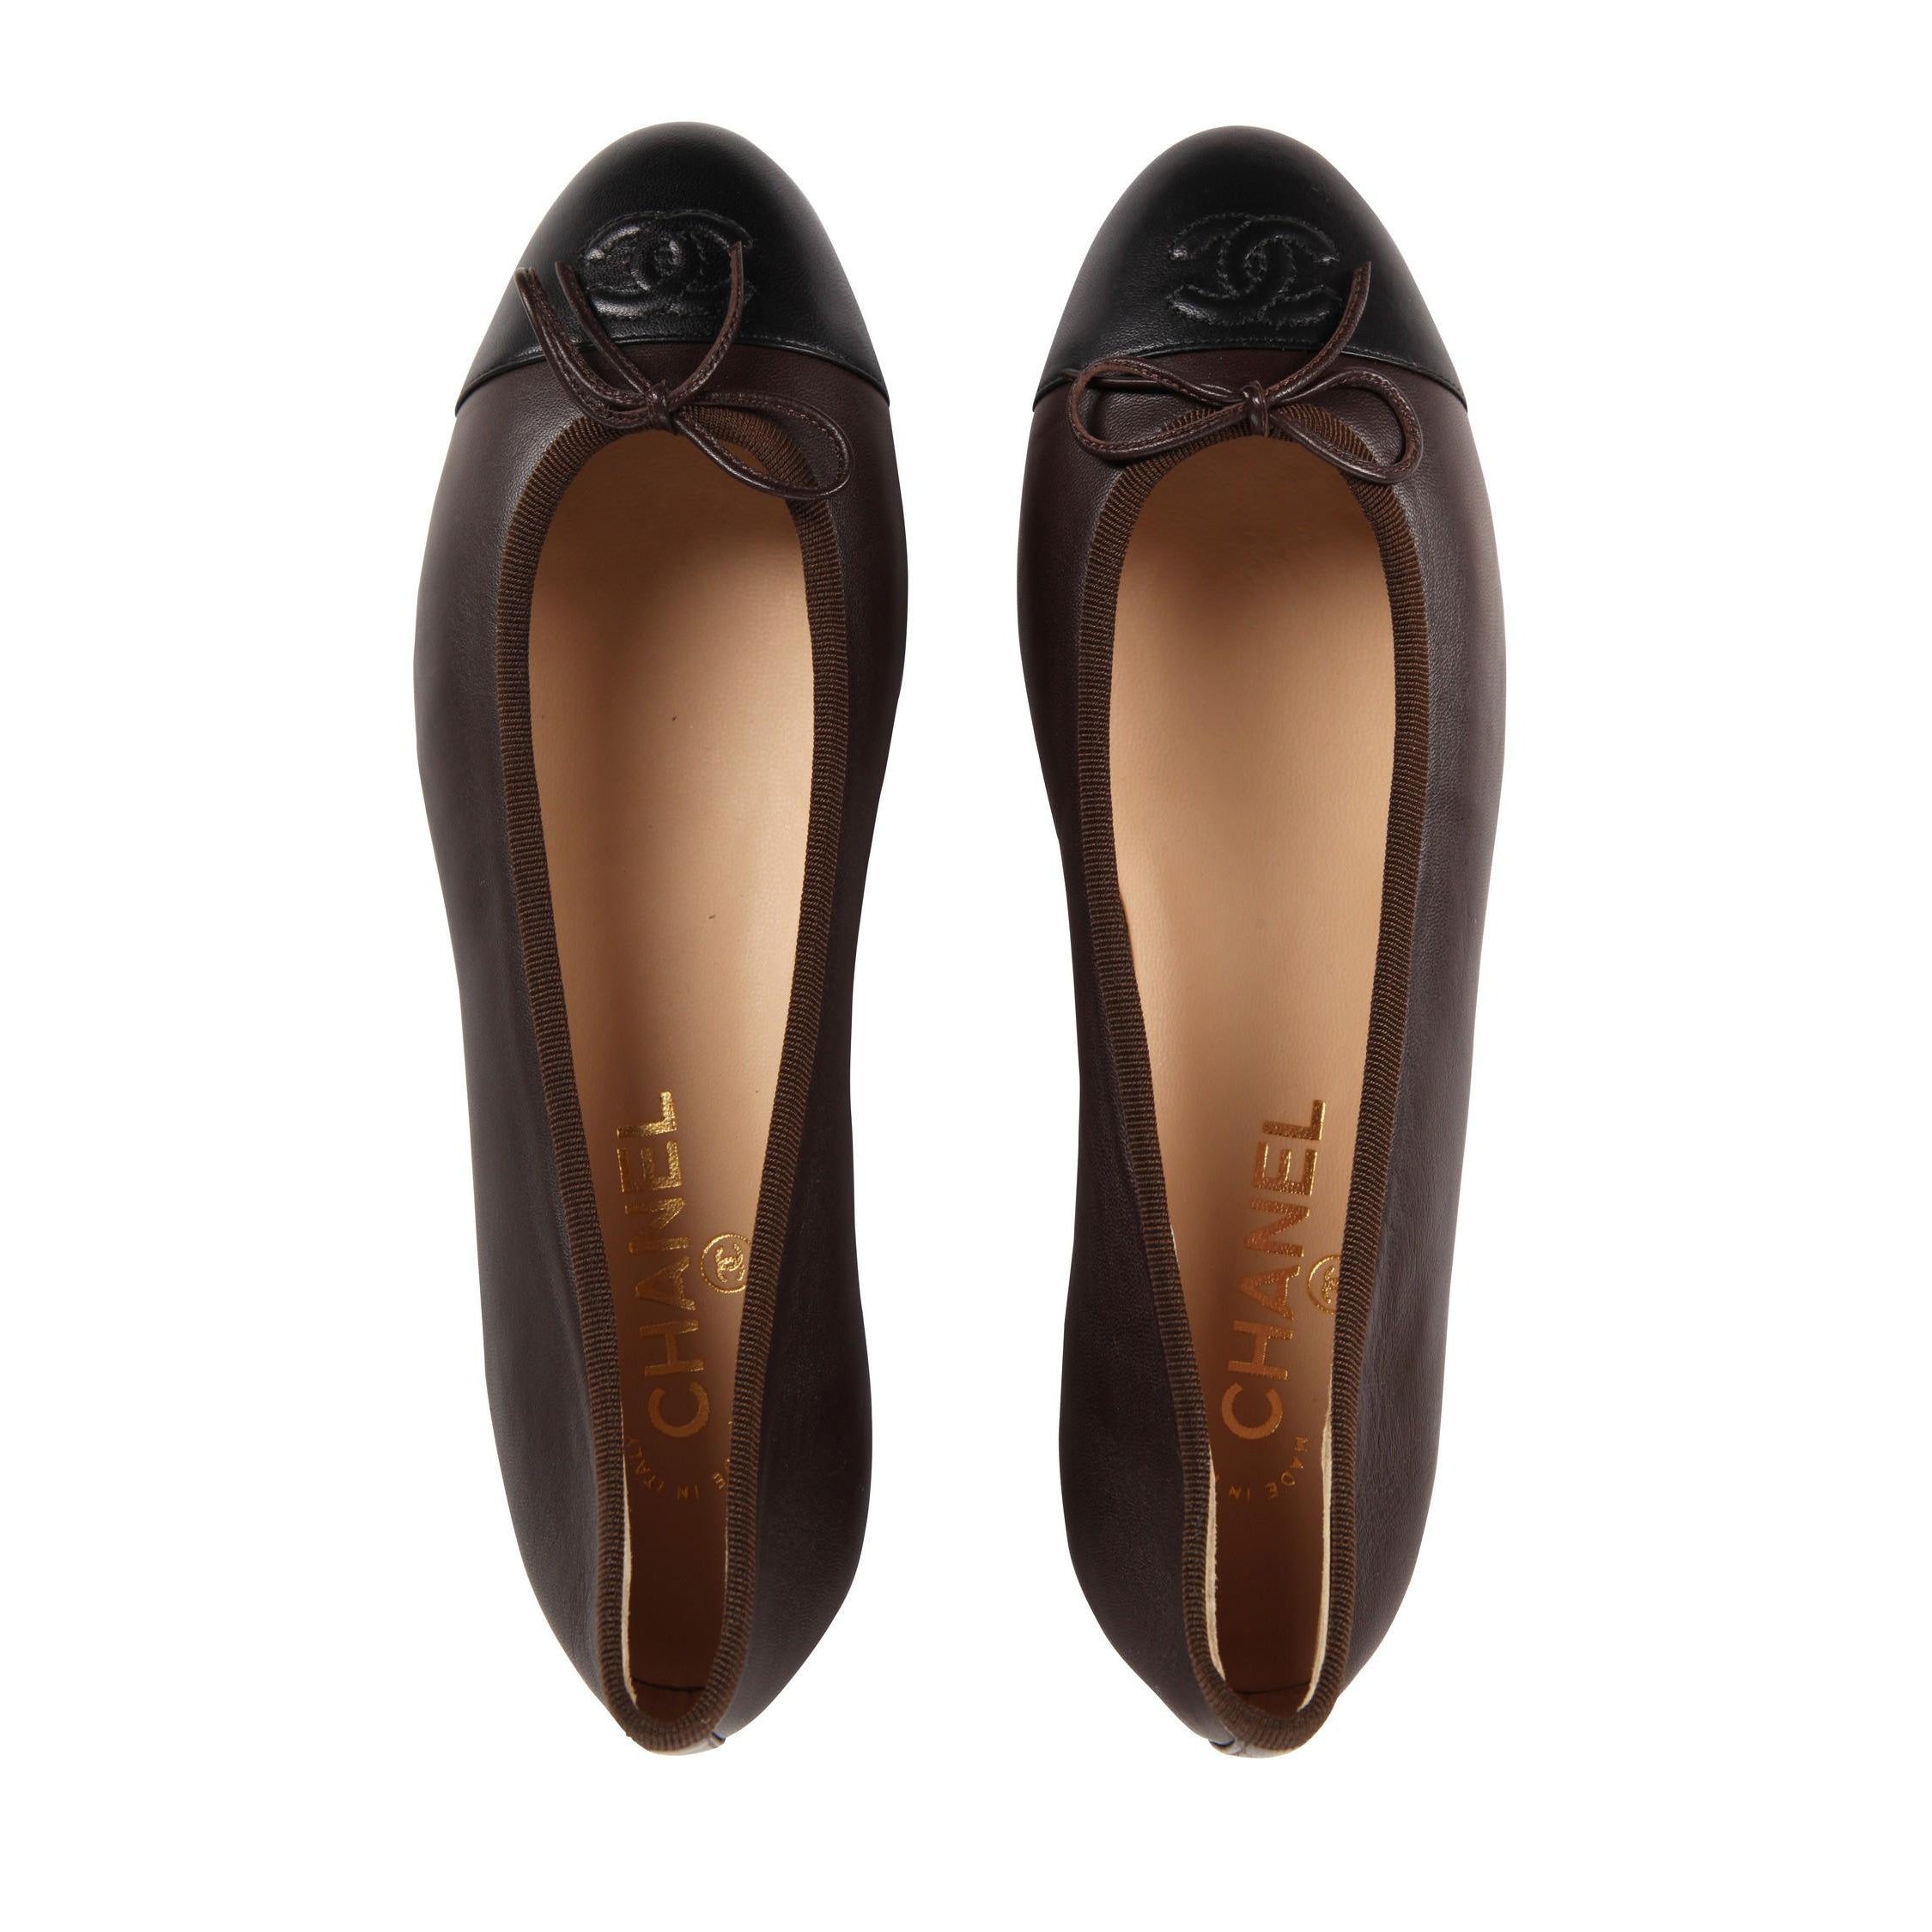 Chanel - Authenticated Ballet Flats - Patent Leather Brown Plain for Women, Very Good Condition